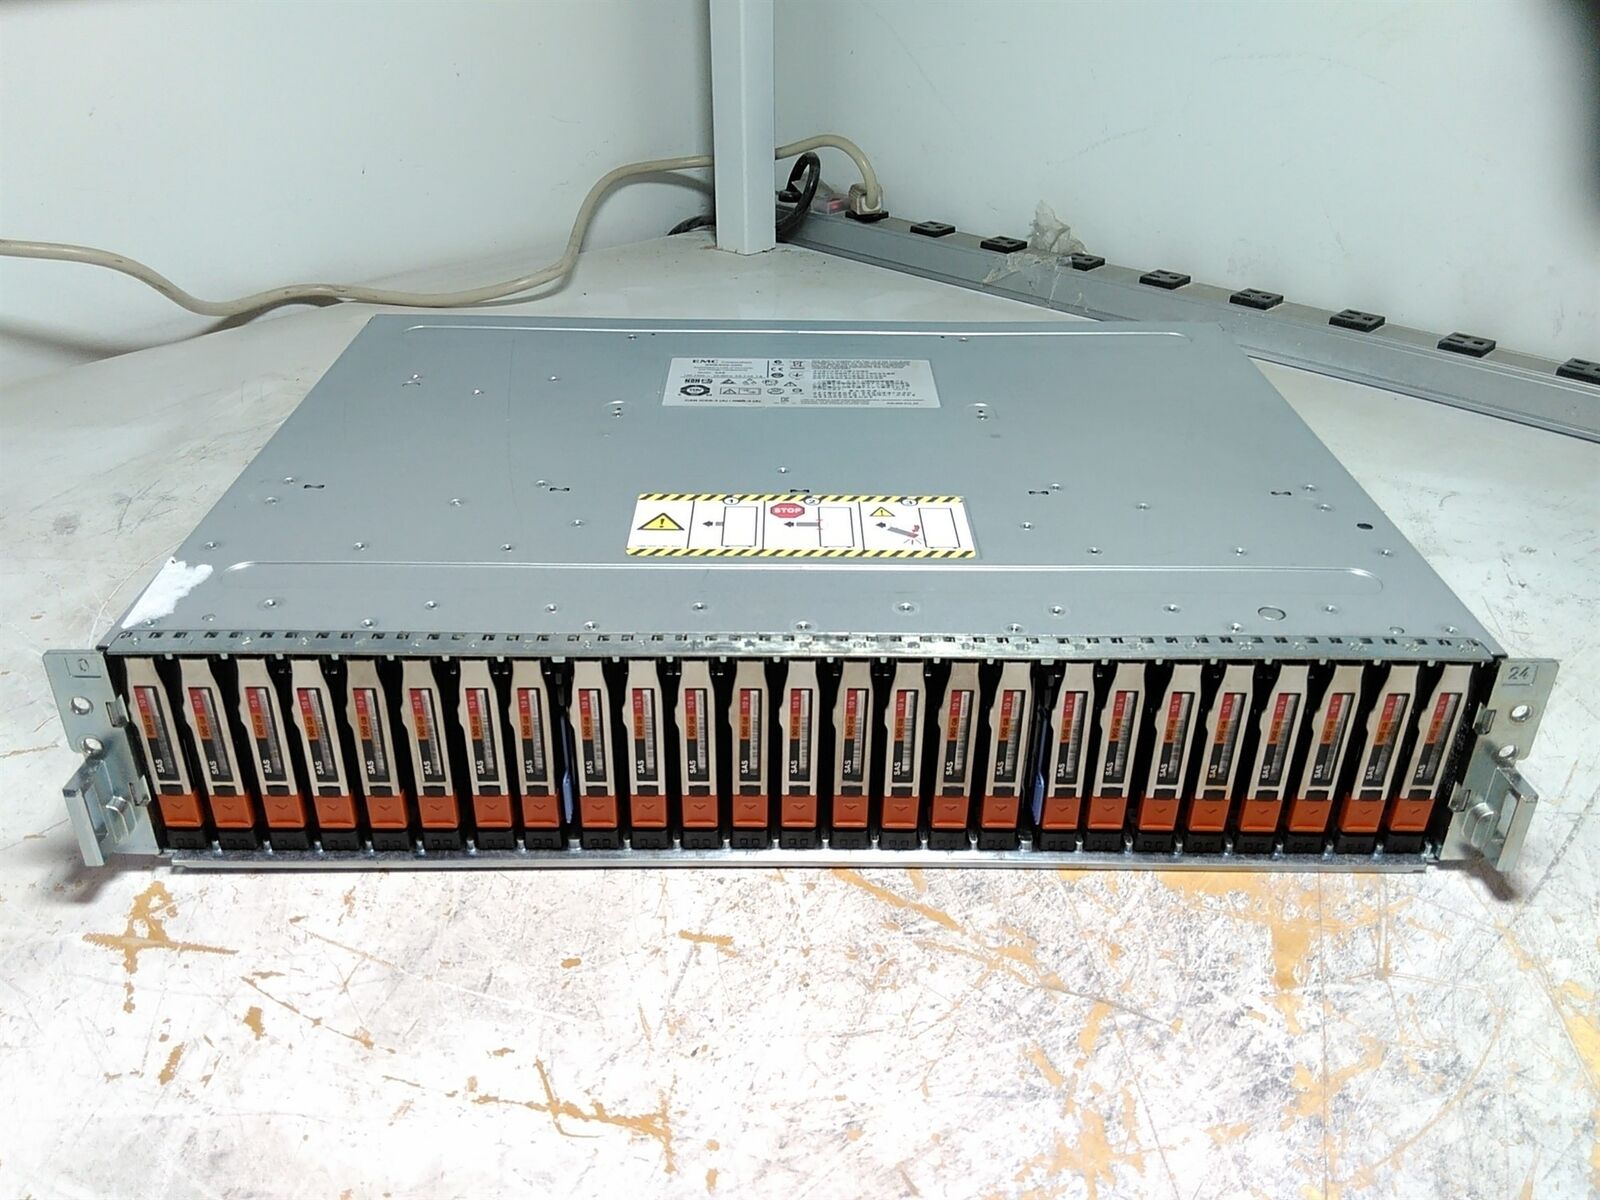 Power Tested Only EMC SAE 25 Bay SAS Disk Array w/ Caddies No Hard Drives AS-IS